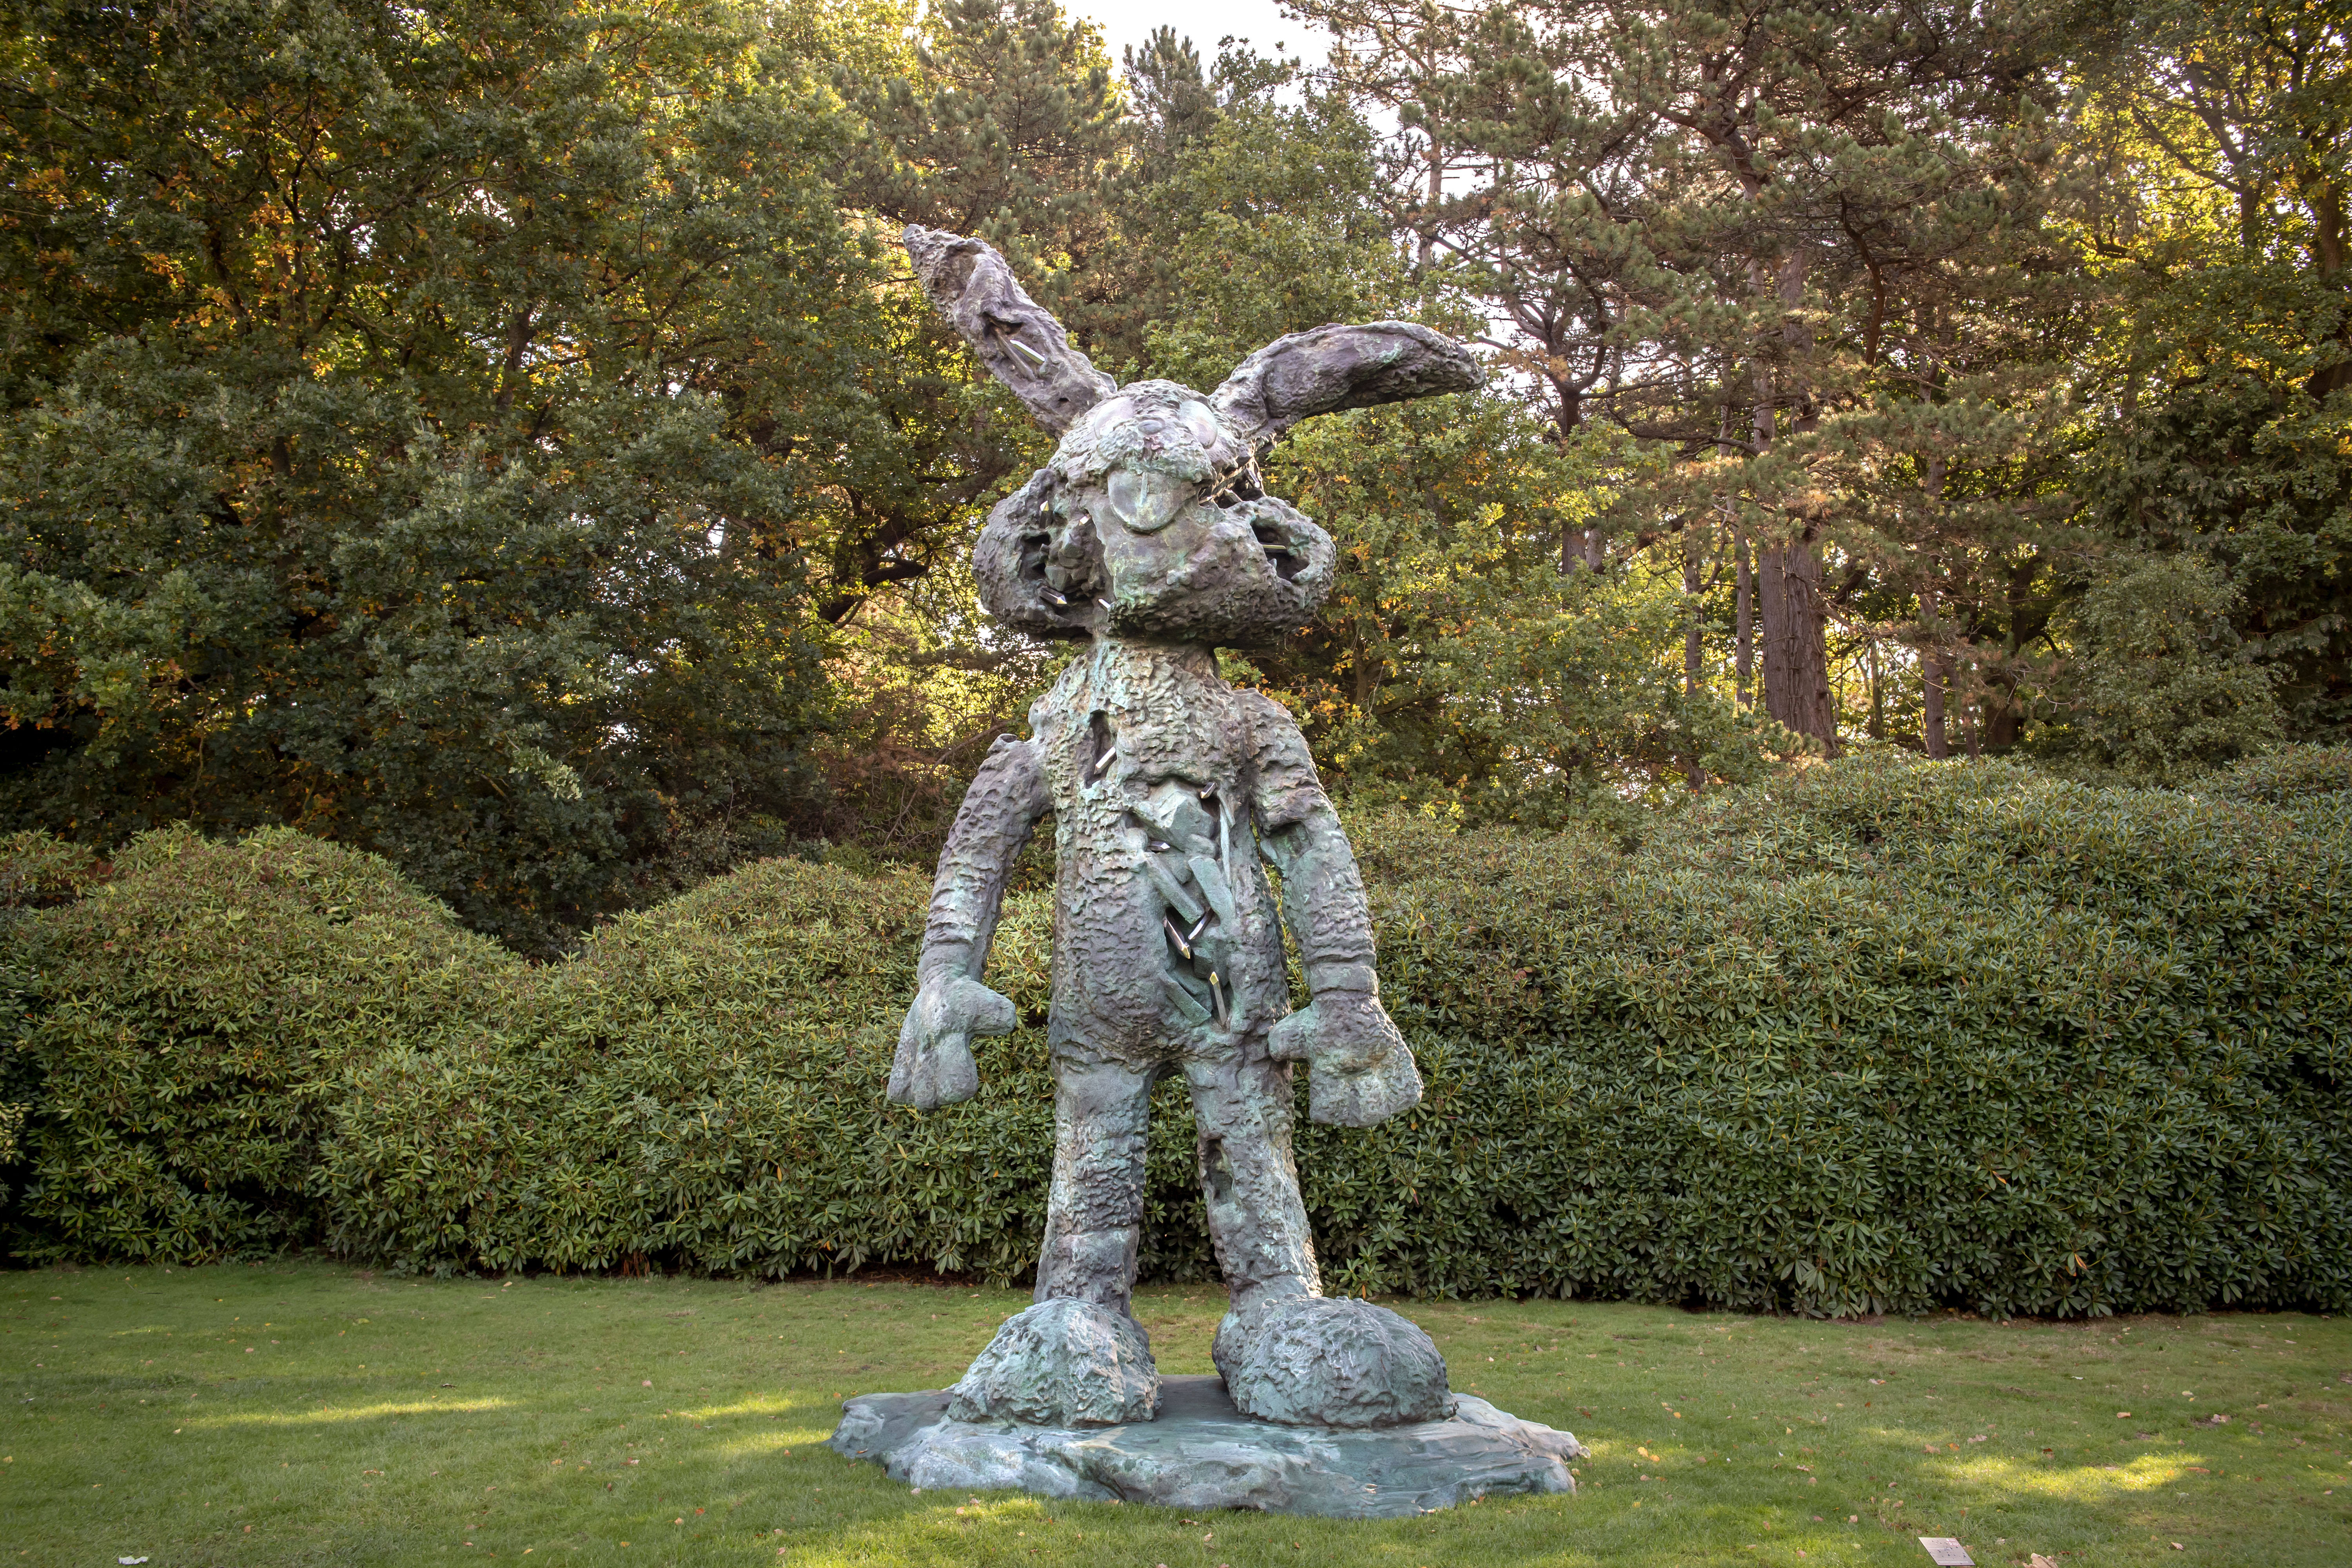 A sculpture of a giant Bugs Bunny shaped soft toy, with eroded crystal sections.